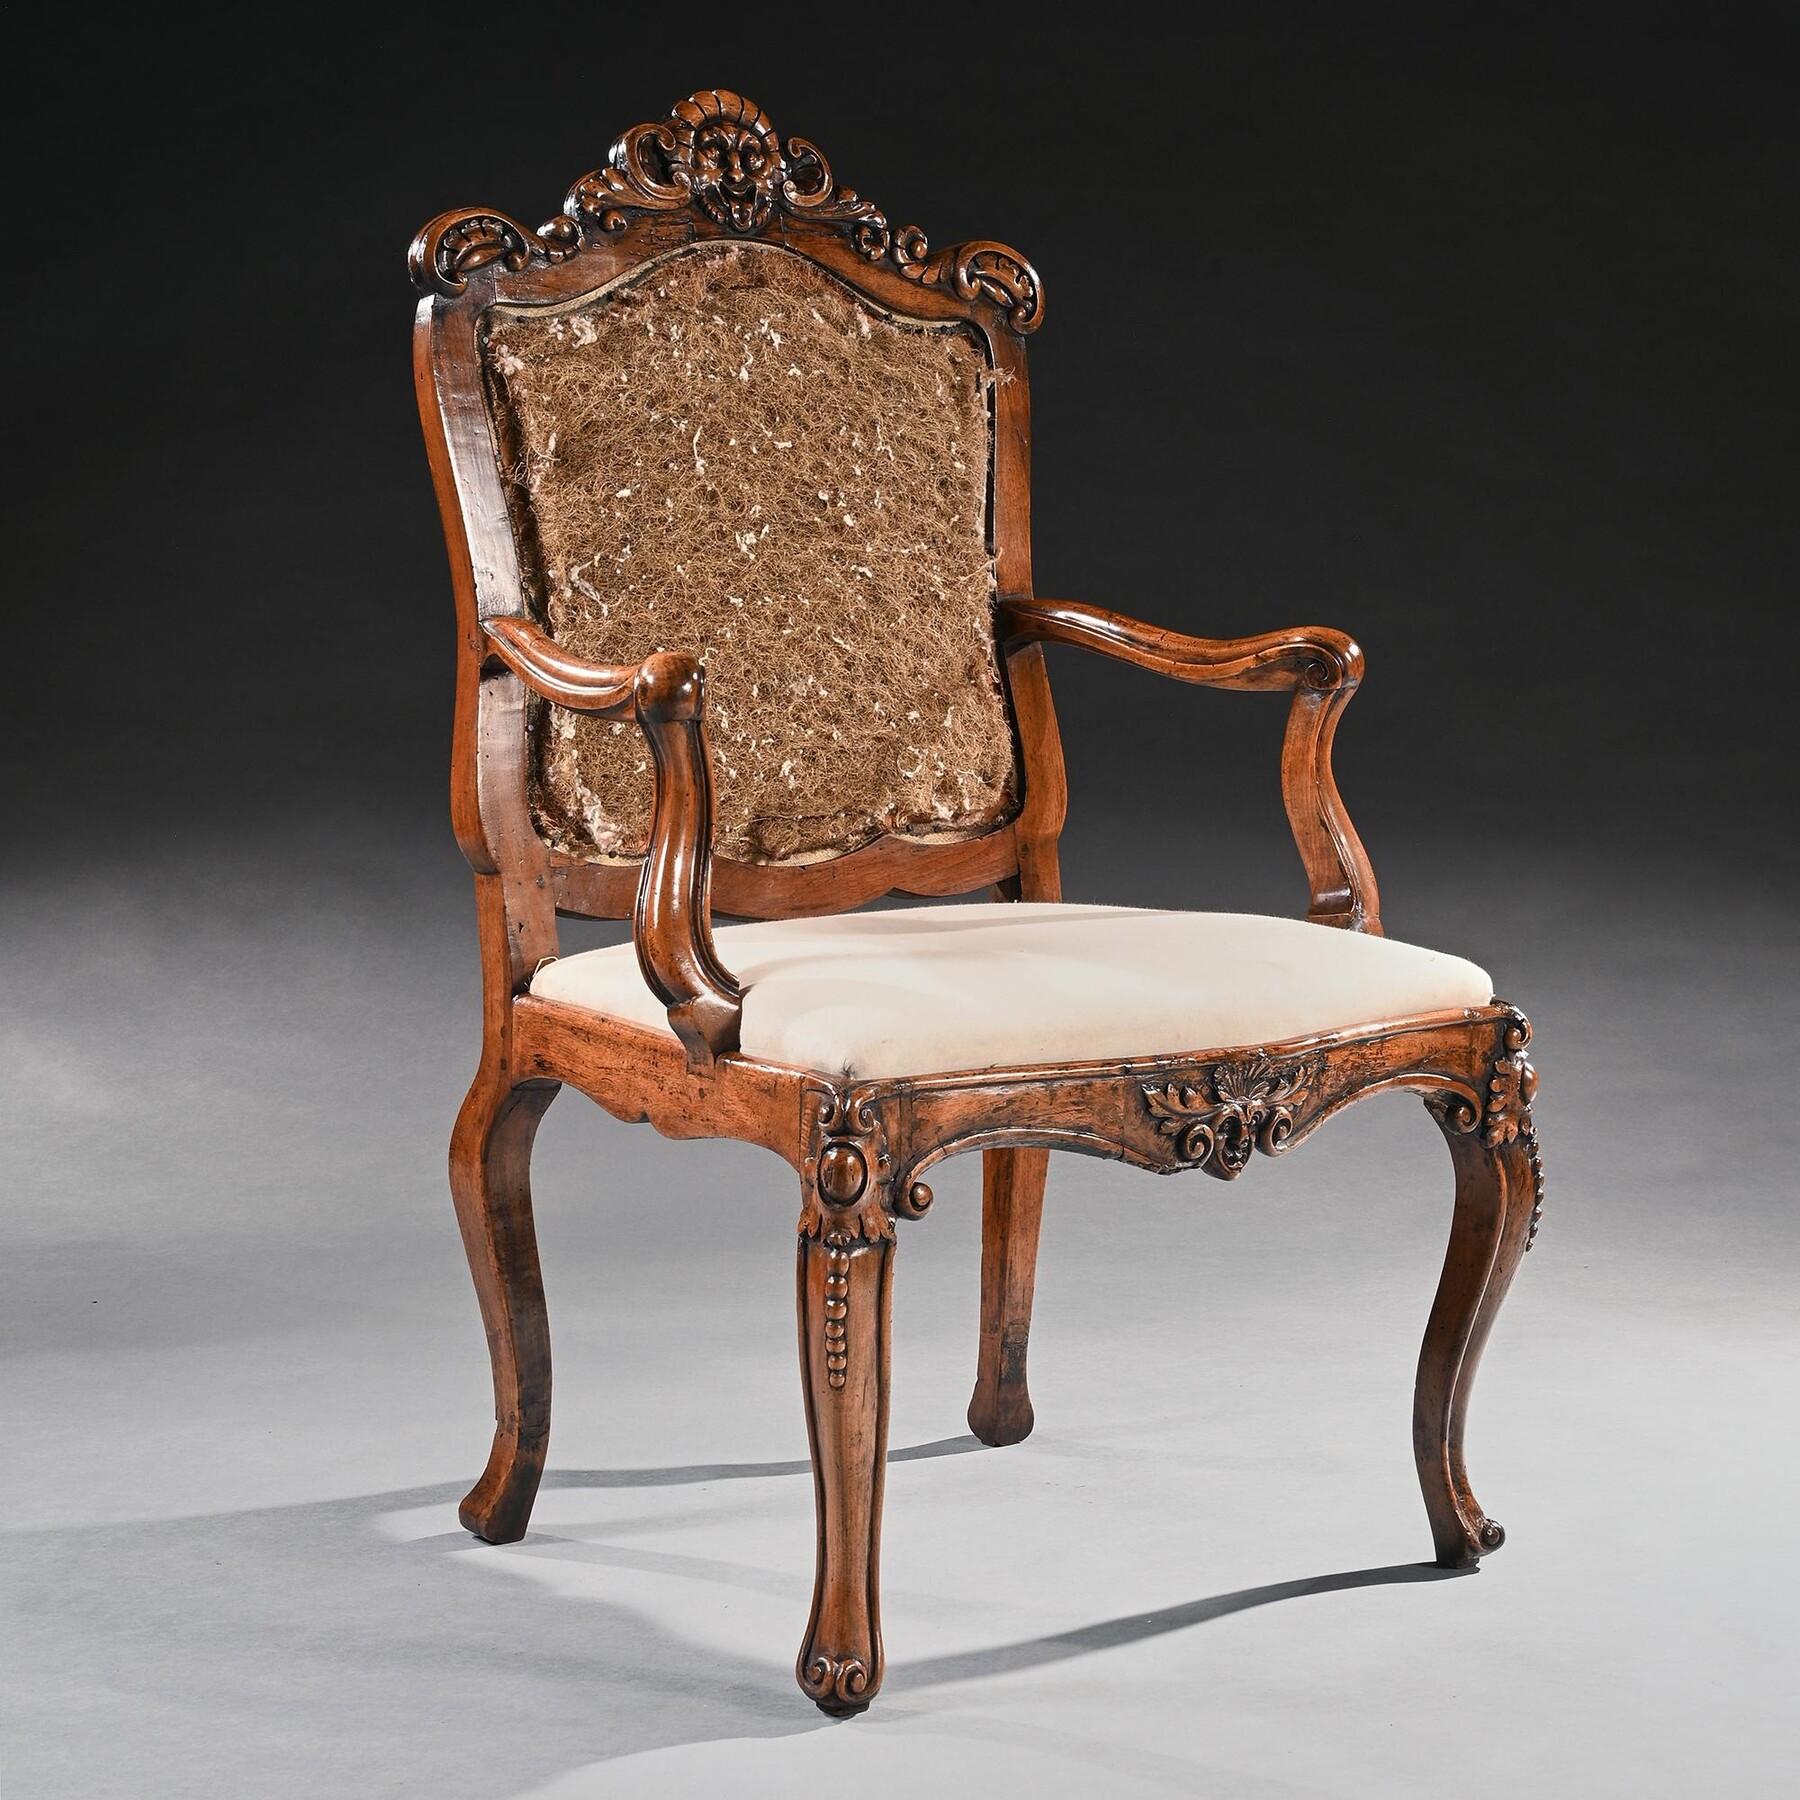 Mid 18th Century Italian Rococo Armchair in Walnut With Extravagantly Carved For Sale 3